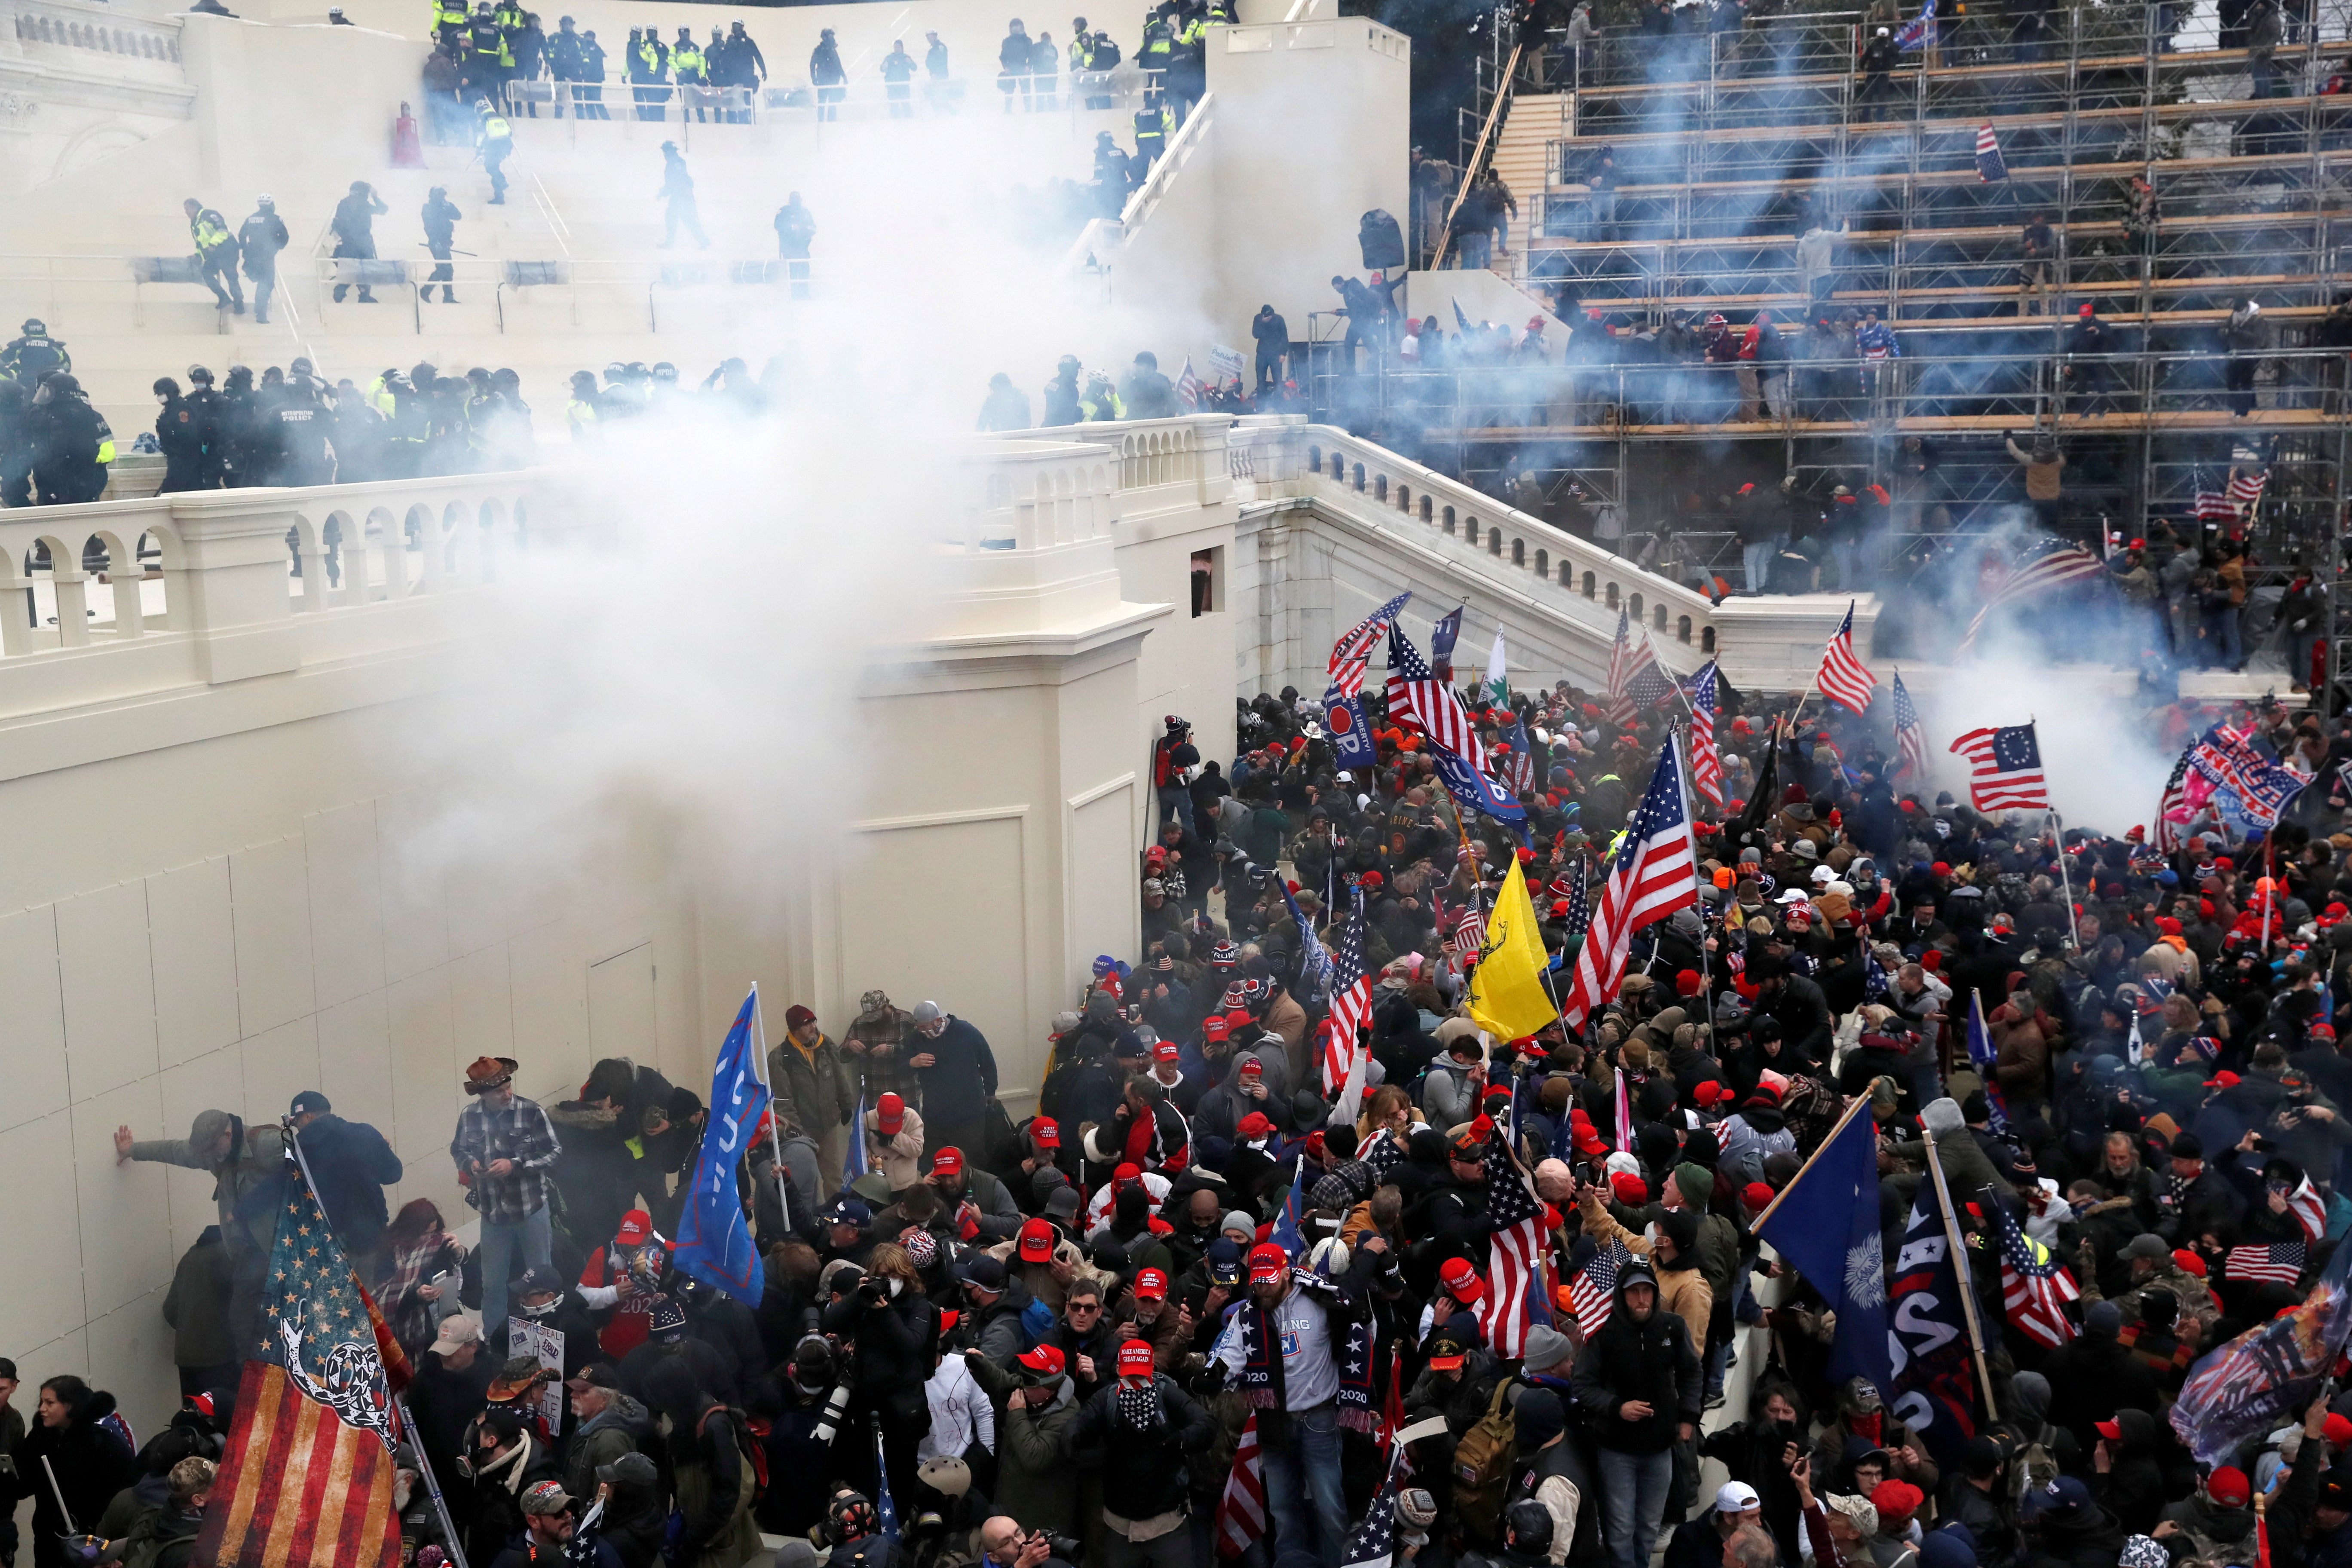 Police release tear gas into a crowd of pro-Trump protesters during clashes at a rally to contest the certification of the 2020 US presidential election results by Congress, at the Capitol Building in Washington, 6 January 2021.